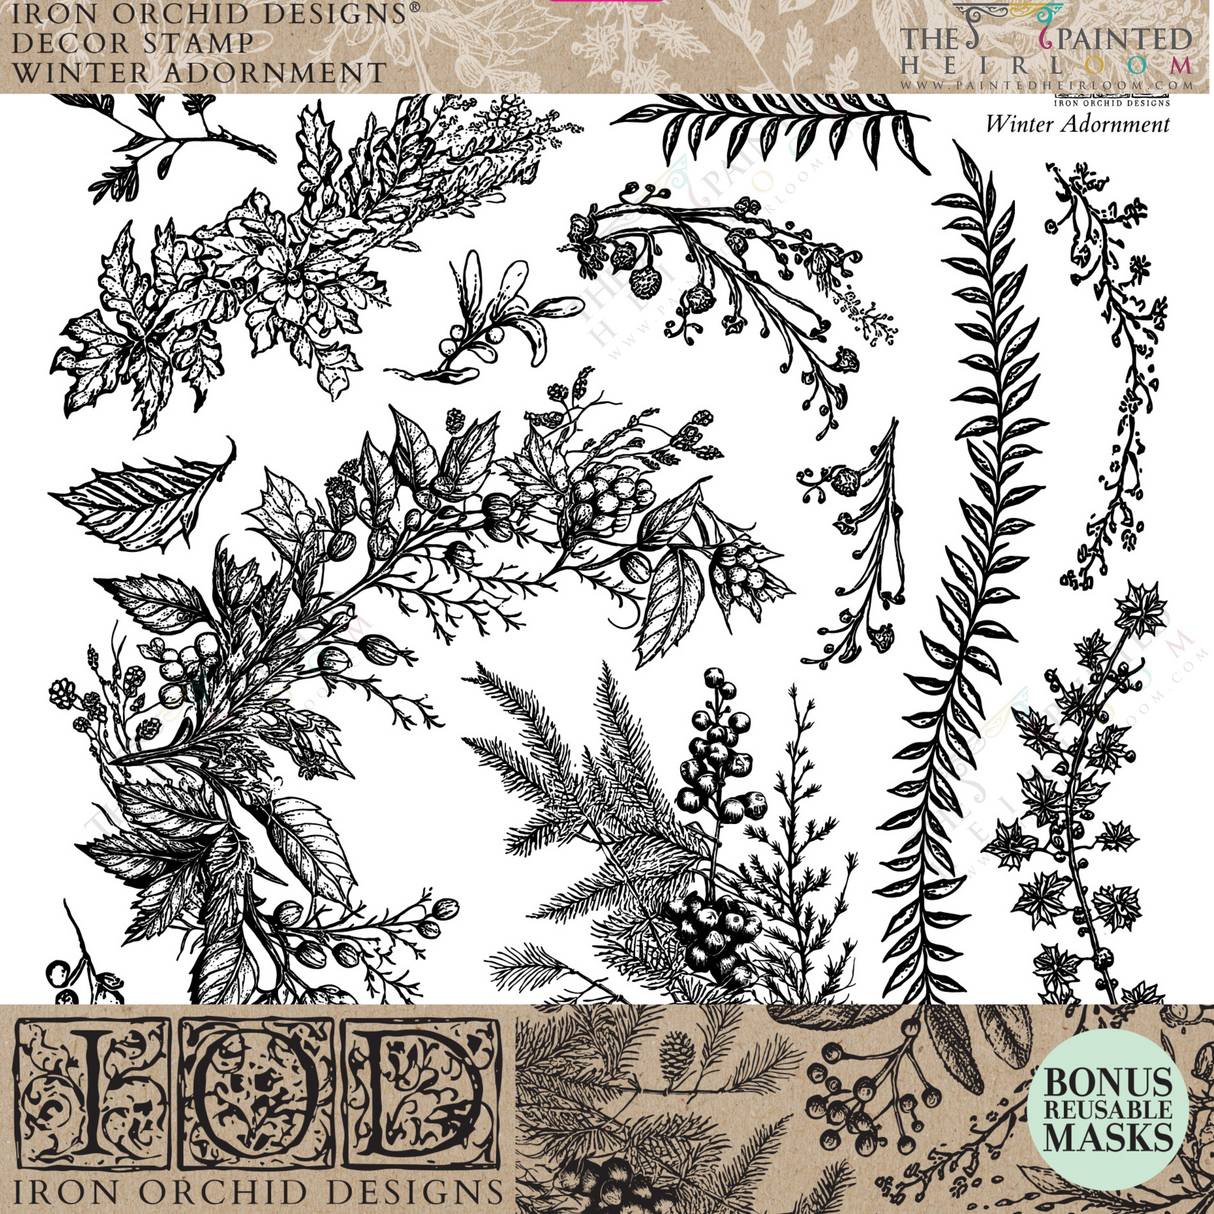 Winter Adornment Stamp (2023 Limited Release) by IOD - Iron Orchid Designs